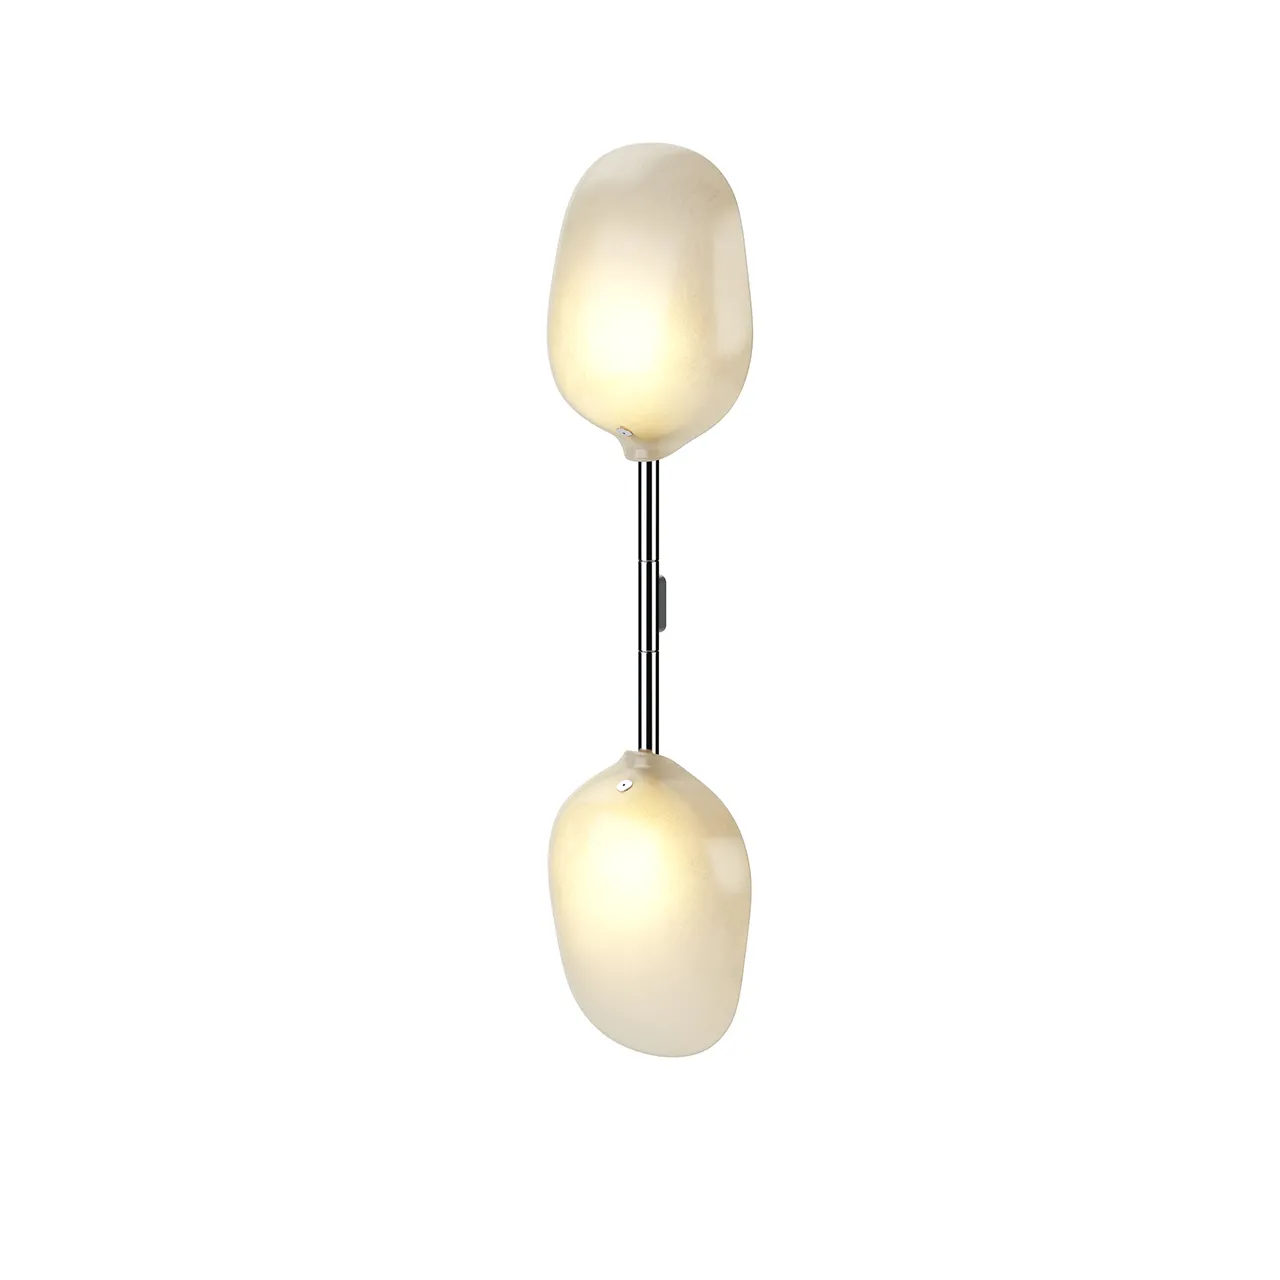 Lighting – pilot-2s-sconce-light-by-rich-brilliant-willing